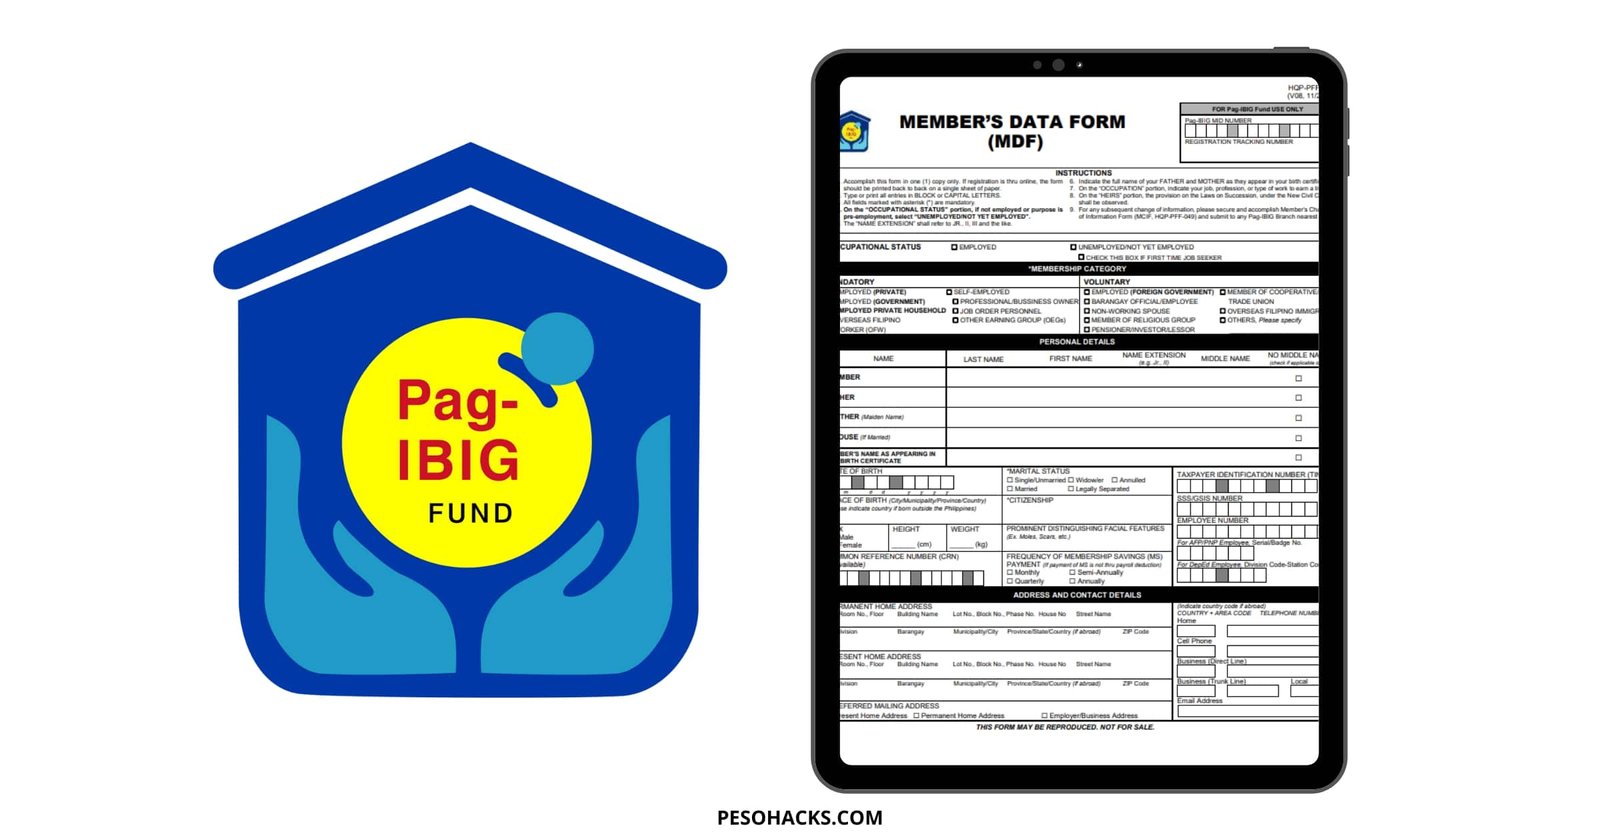 How To Get Pag IBIG MDF Online Beginner s Guide Peso Hacks